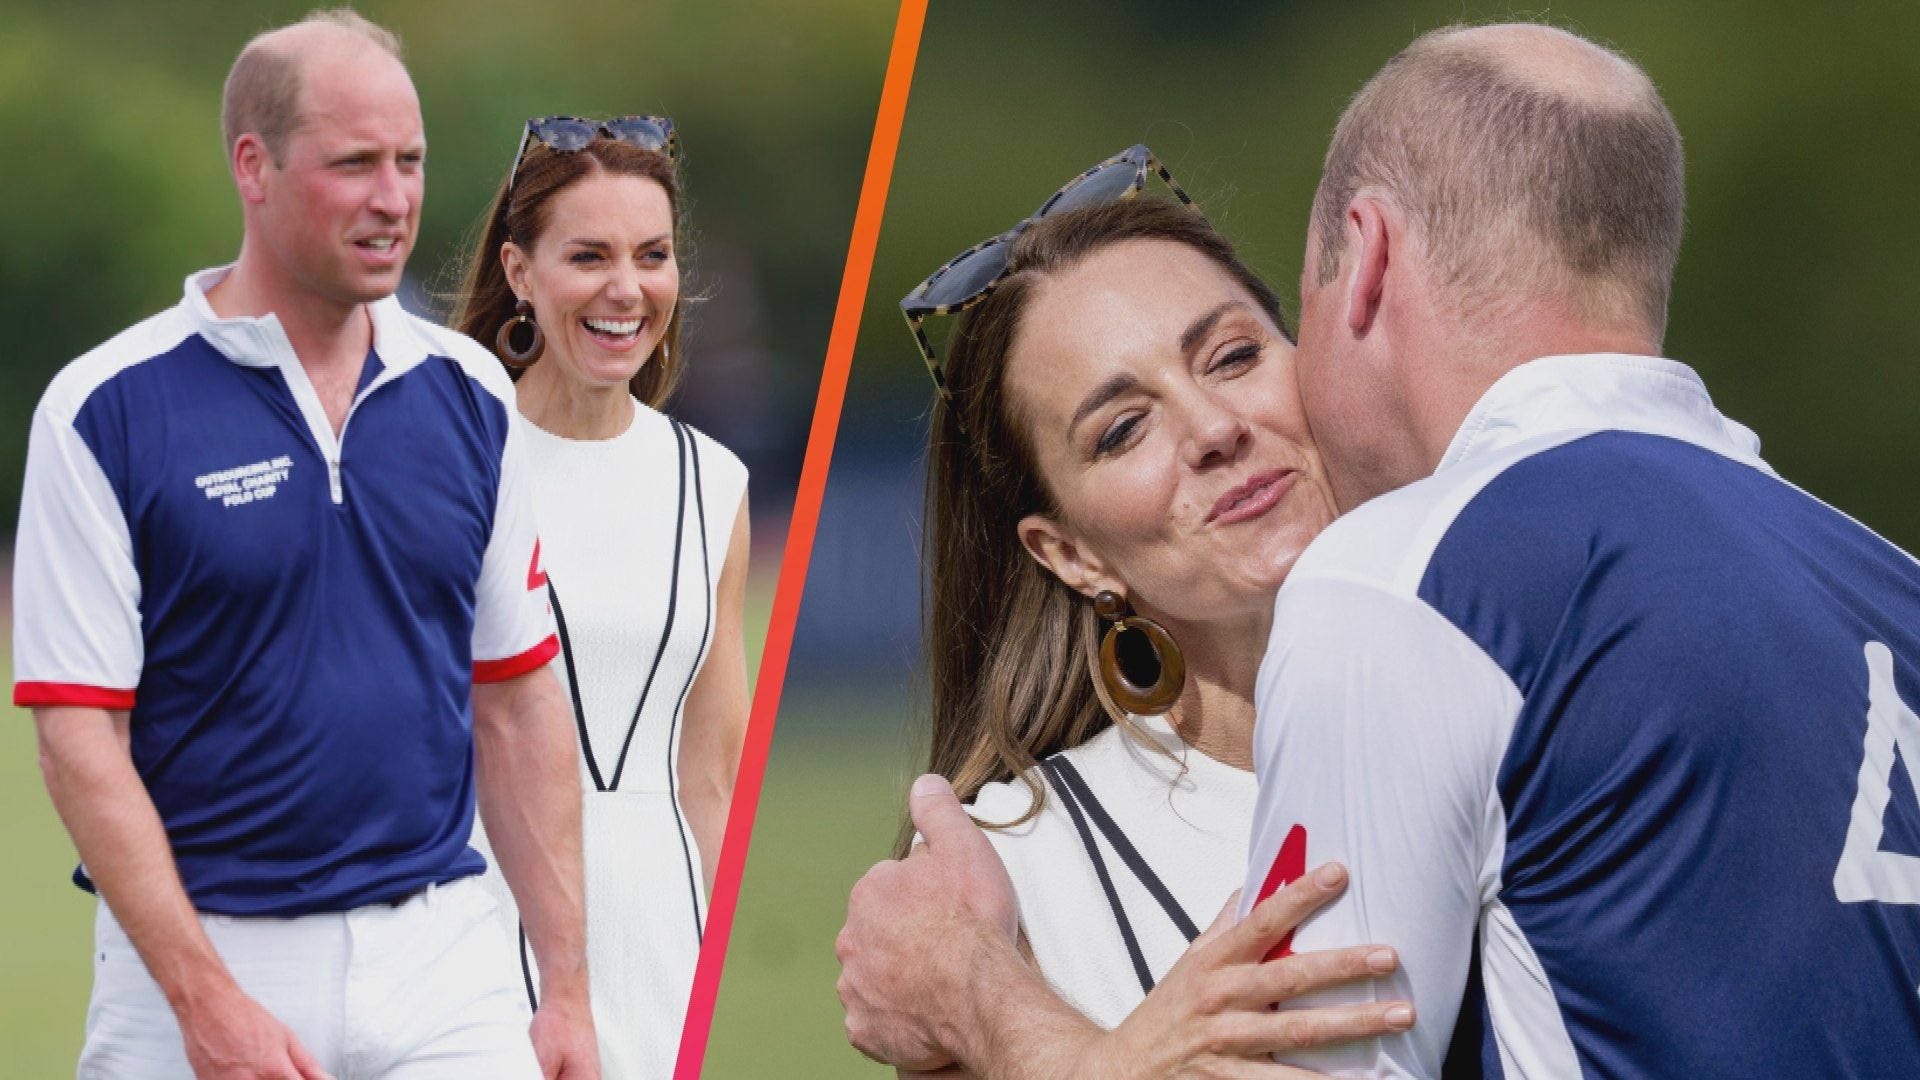 kate middleton and prince william kiss